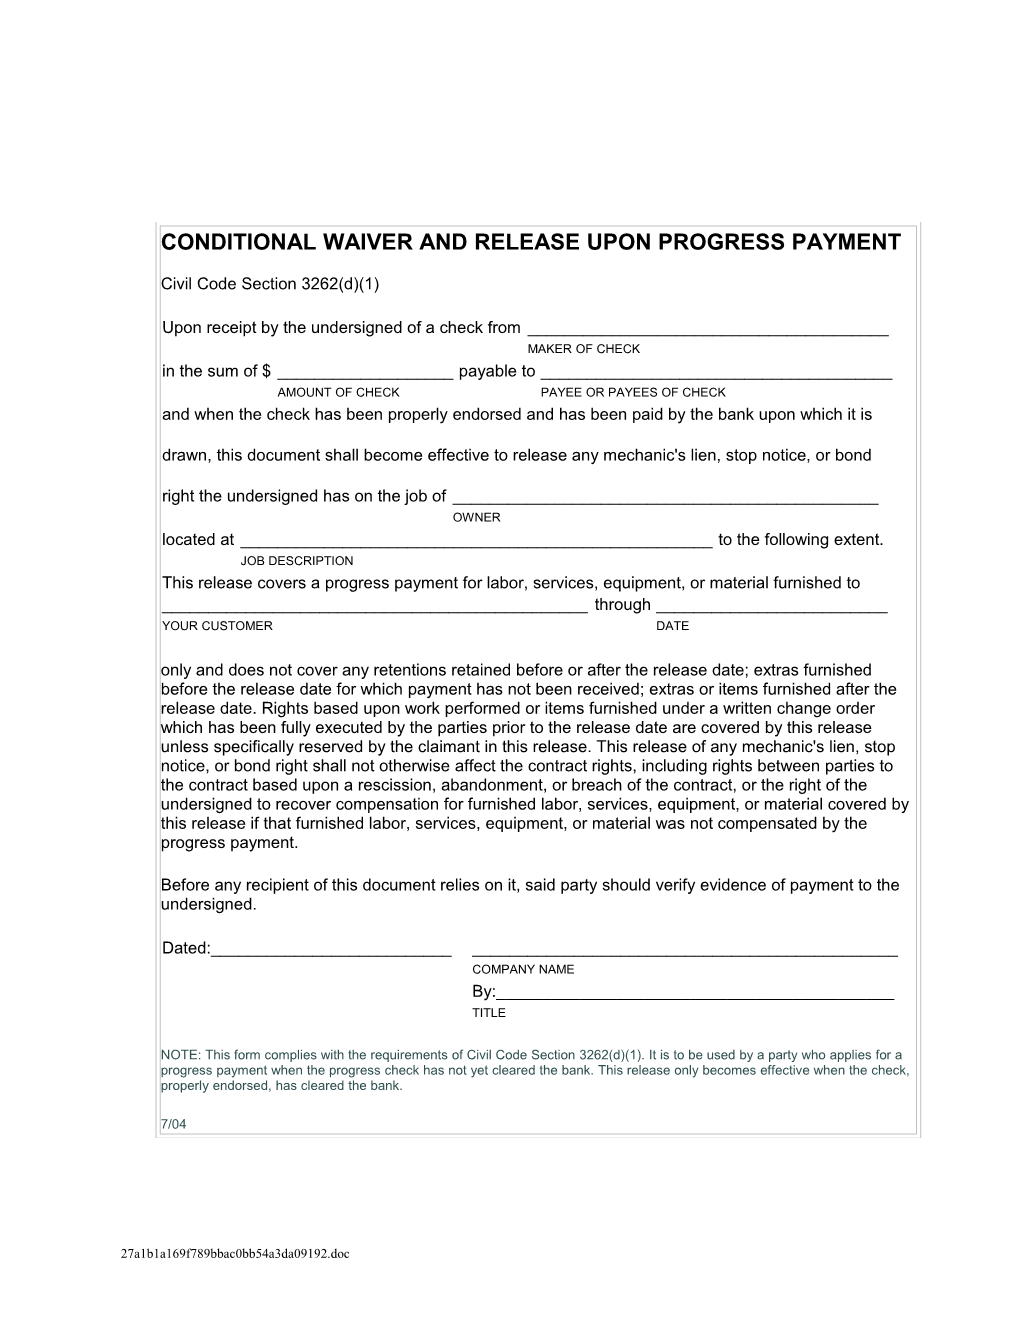 Conditional Waiver and Release Upon Progress Payment